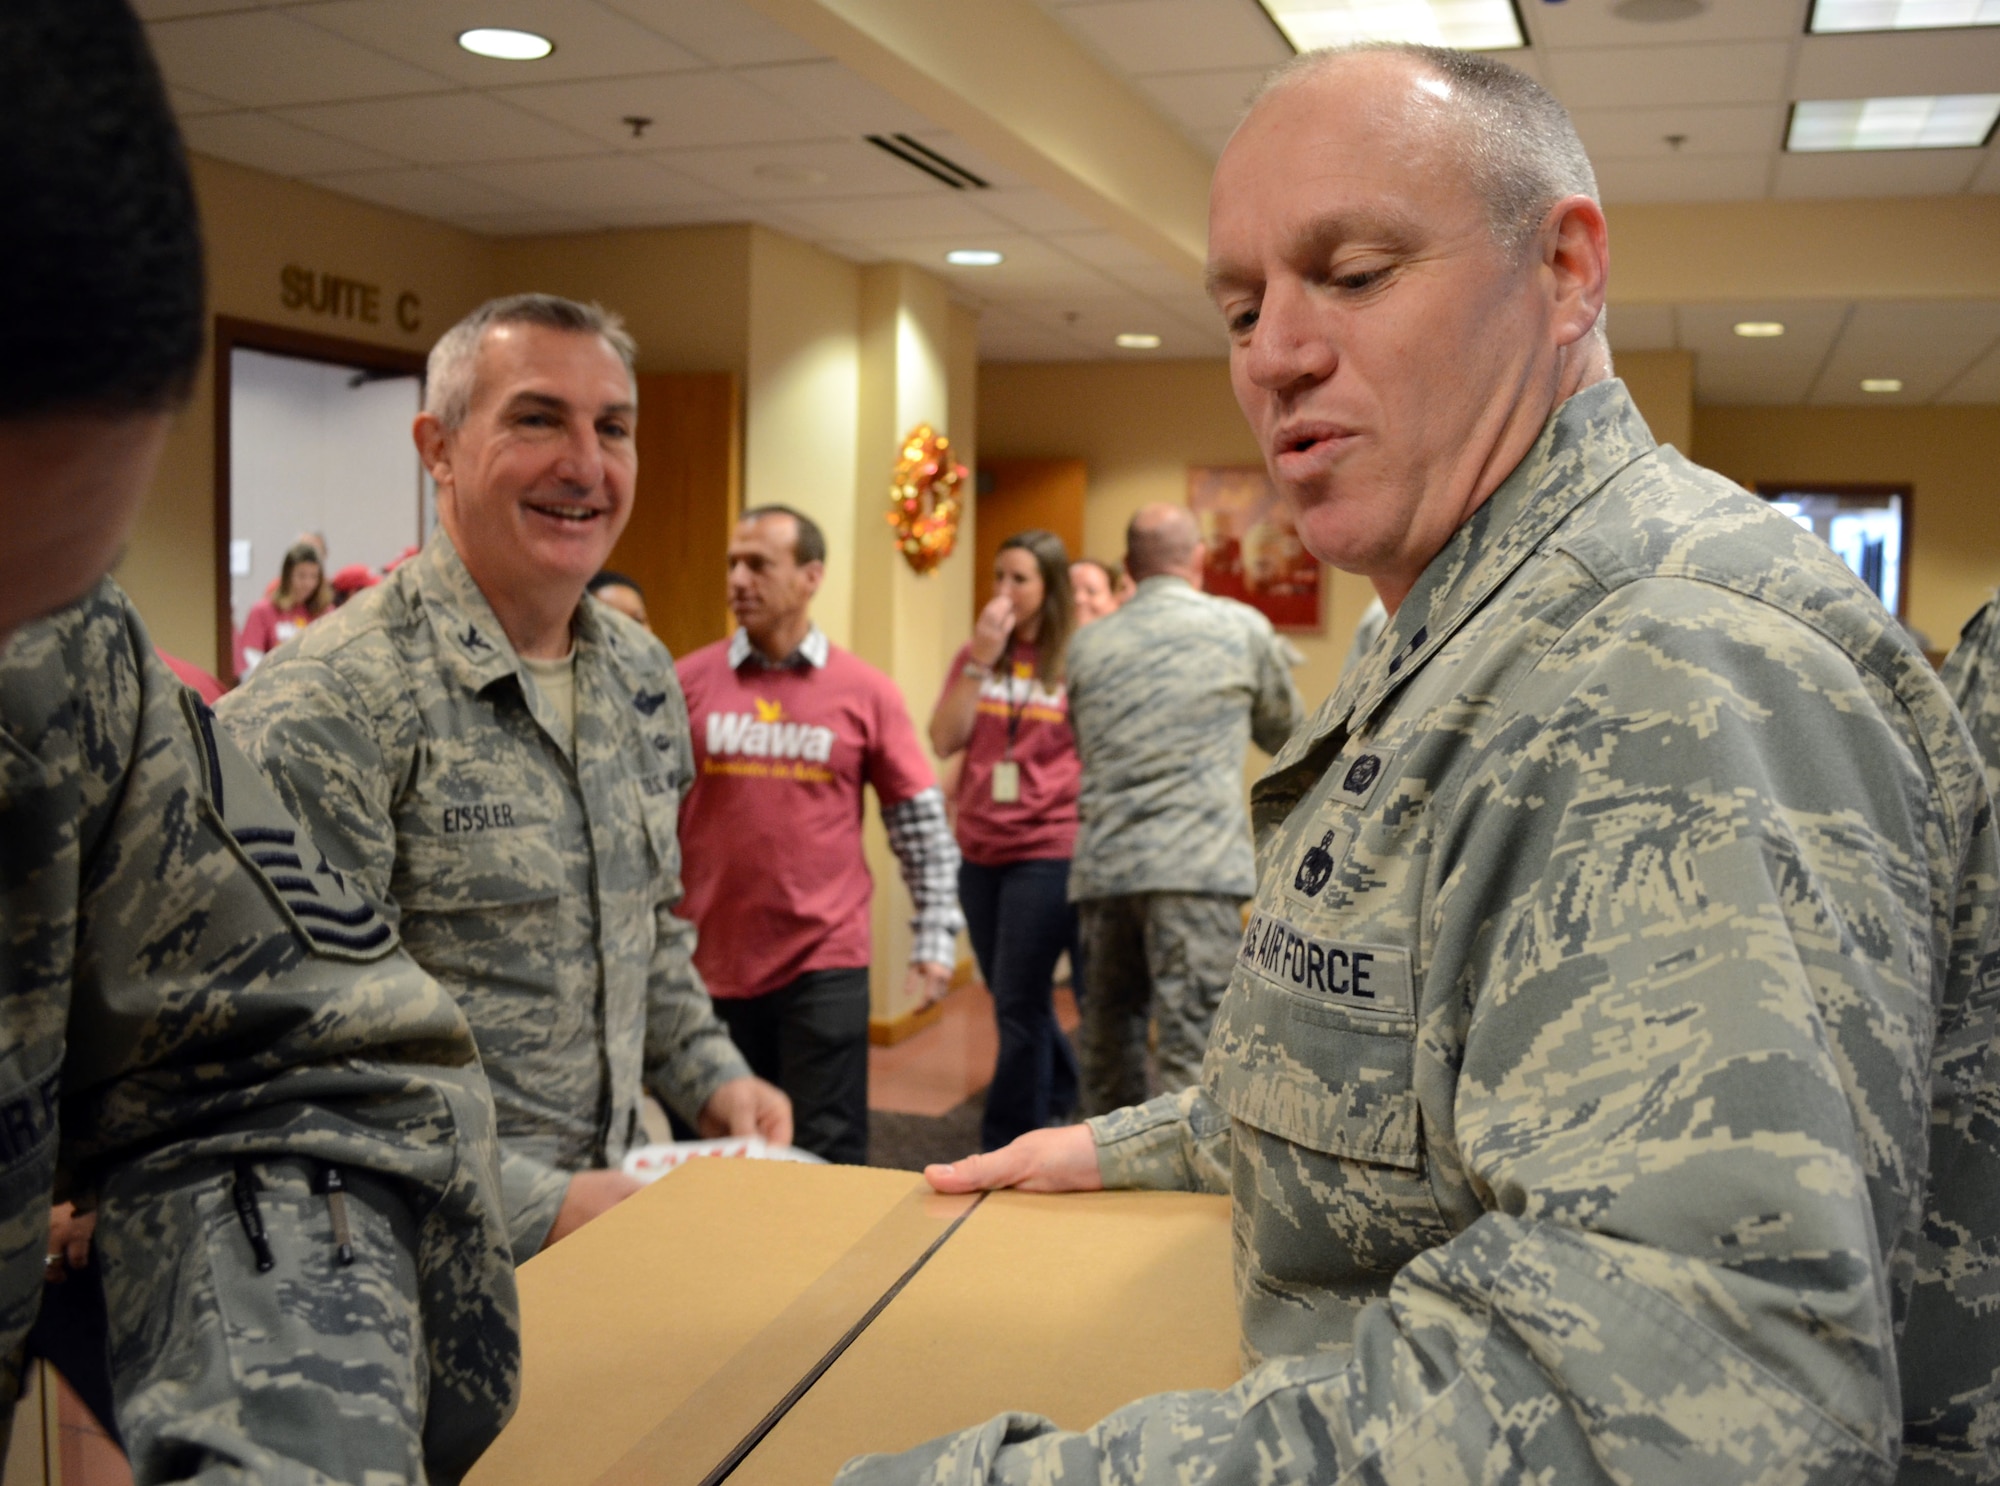 Capt. Daniel Taylor, 111th Attack Wing Logistics Readiness Squadron installation deployment officer, and 111th ATKW Commander Col. Howard “Chip” Eissler (left) participate in Operation Stocking Stuffers alongside Wawa associates, creating care packages for deployed service members Nov. 10, 2014, in Media, Pa. Guardsmen and civilian volunteers worked to create more than 9,000 pounds of charitable packages. (U.S. Air National Guard photo by Master Sgt. Christopher Botzum/Released)